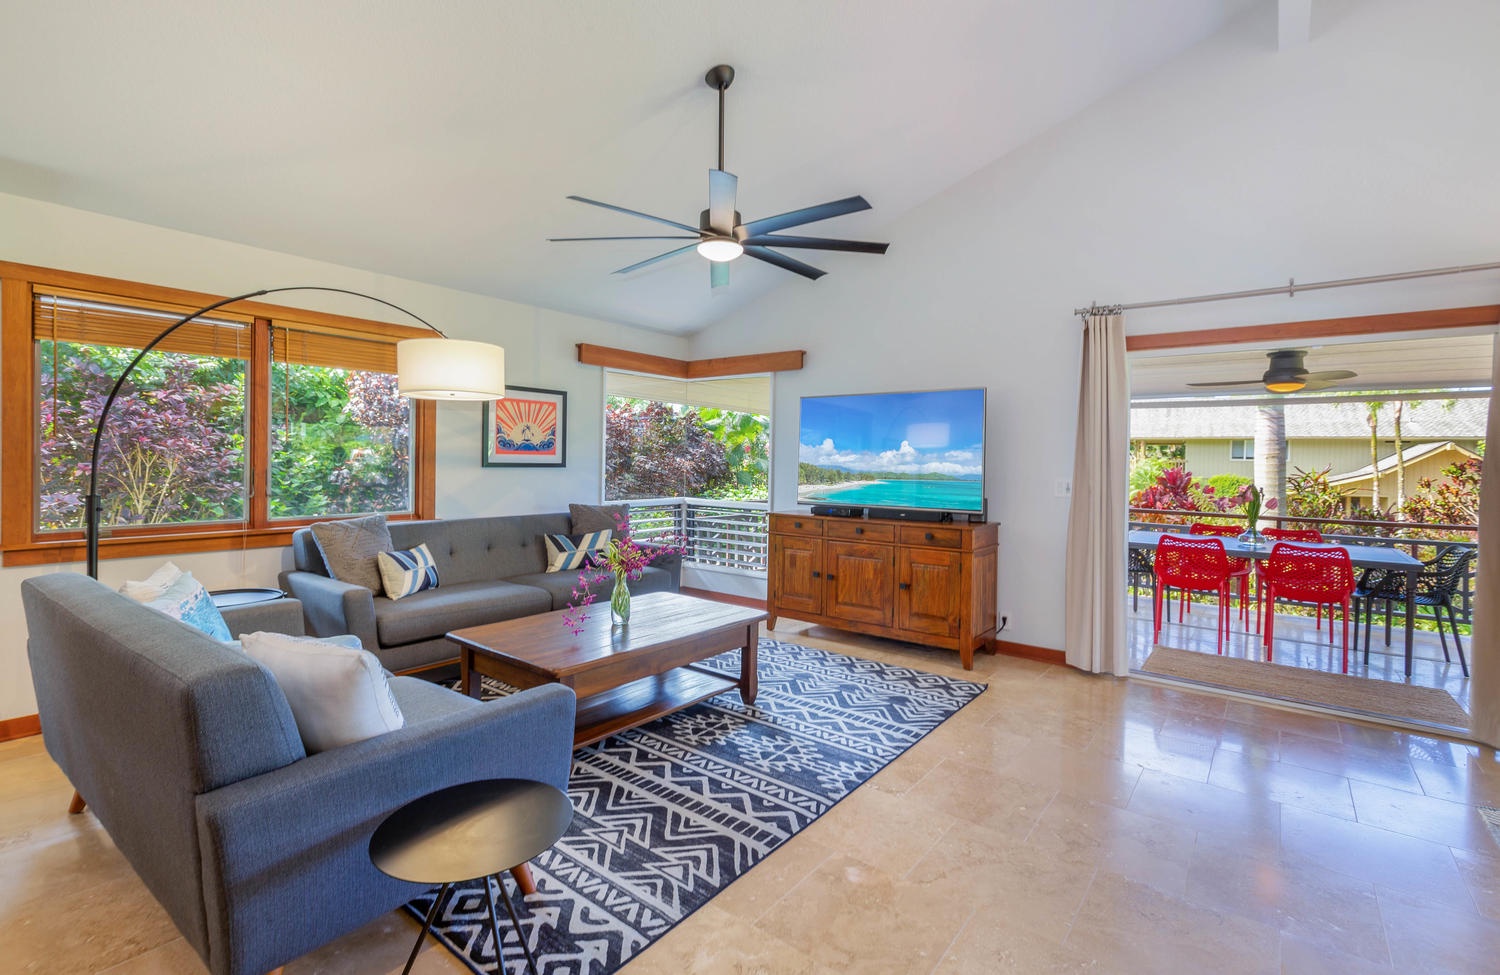 Princeville Vacation Rentals, Makana Lei - Living space with covered lanai beyond